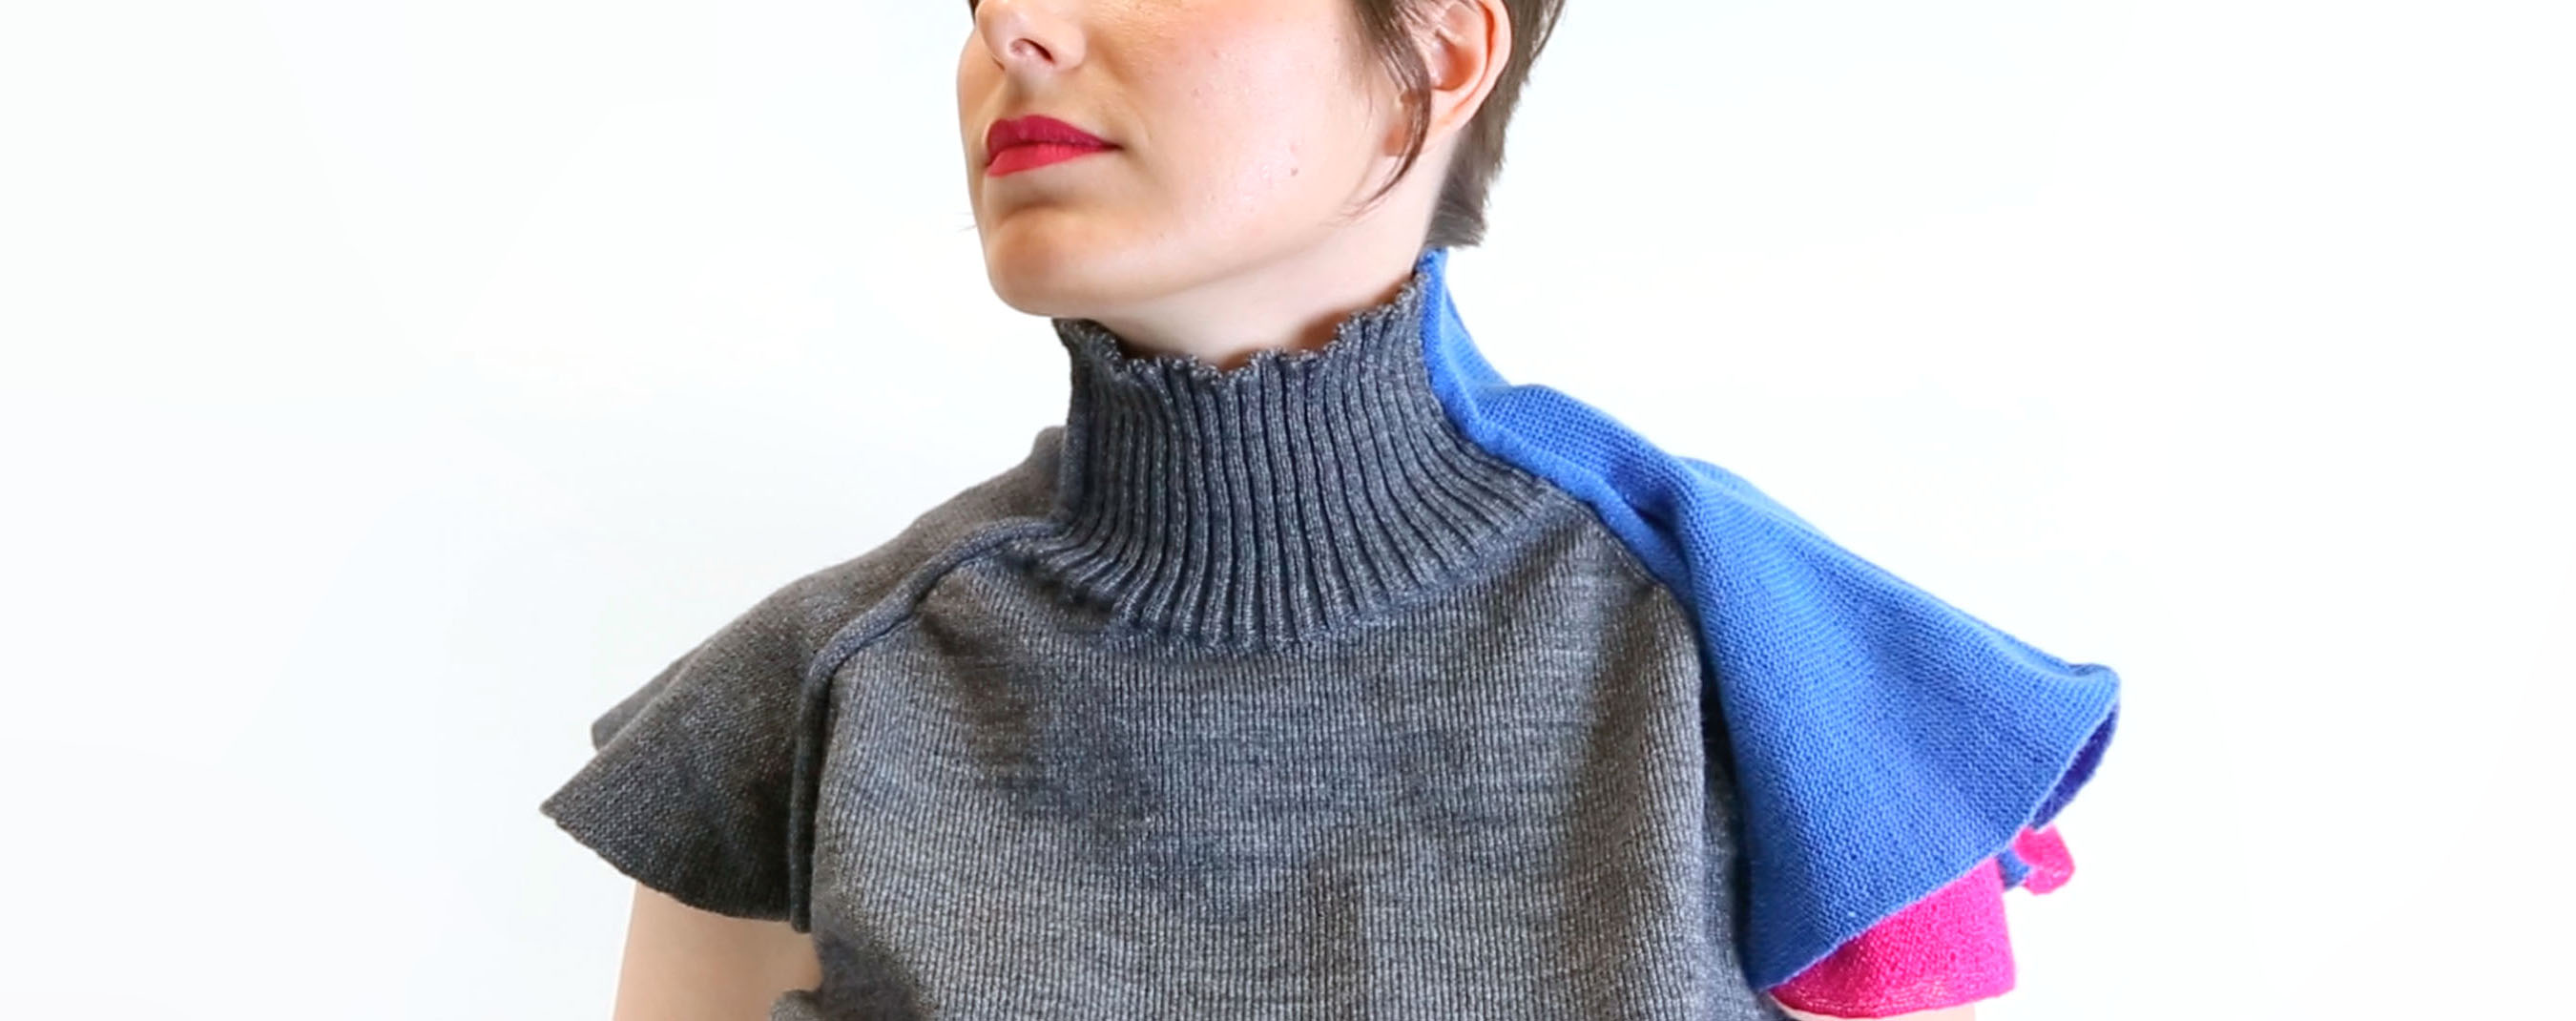 A sweater that can tap the wearer on the shoulder; before.